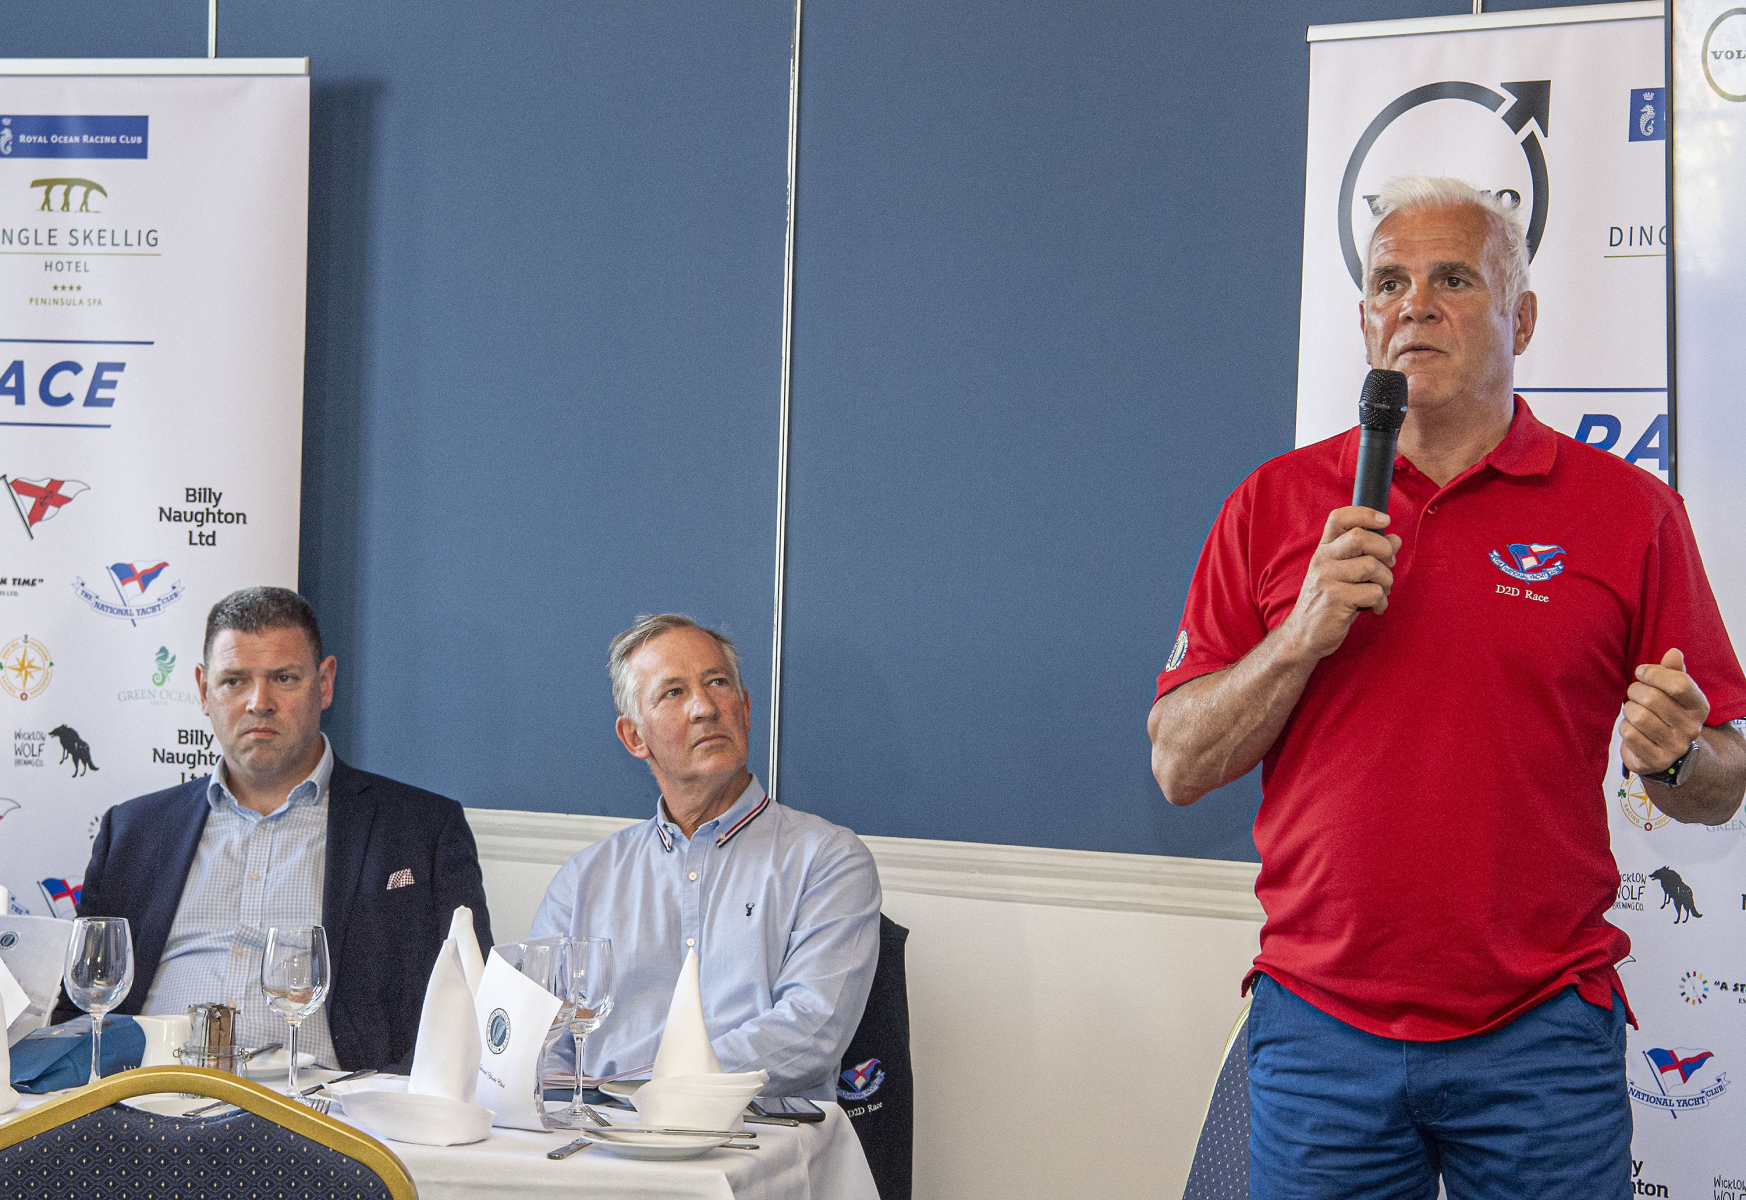 At the D2D reception / Sailing Briefing in the National Yacht Club L to R Alan Crowley MD of Volvo Cars Ireland Peter Sherry Commodore NYC and Adam Winkelmann Chiarman of the D2D 

No Reproduction Fee 

Pic © Michael Chester 
Phone 0878072295 
info@chester.ie 
www.chester.ie